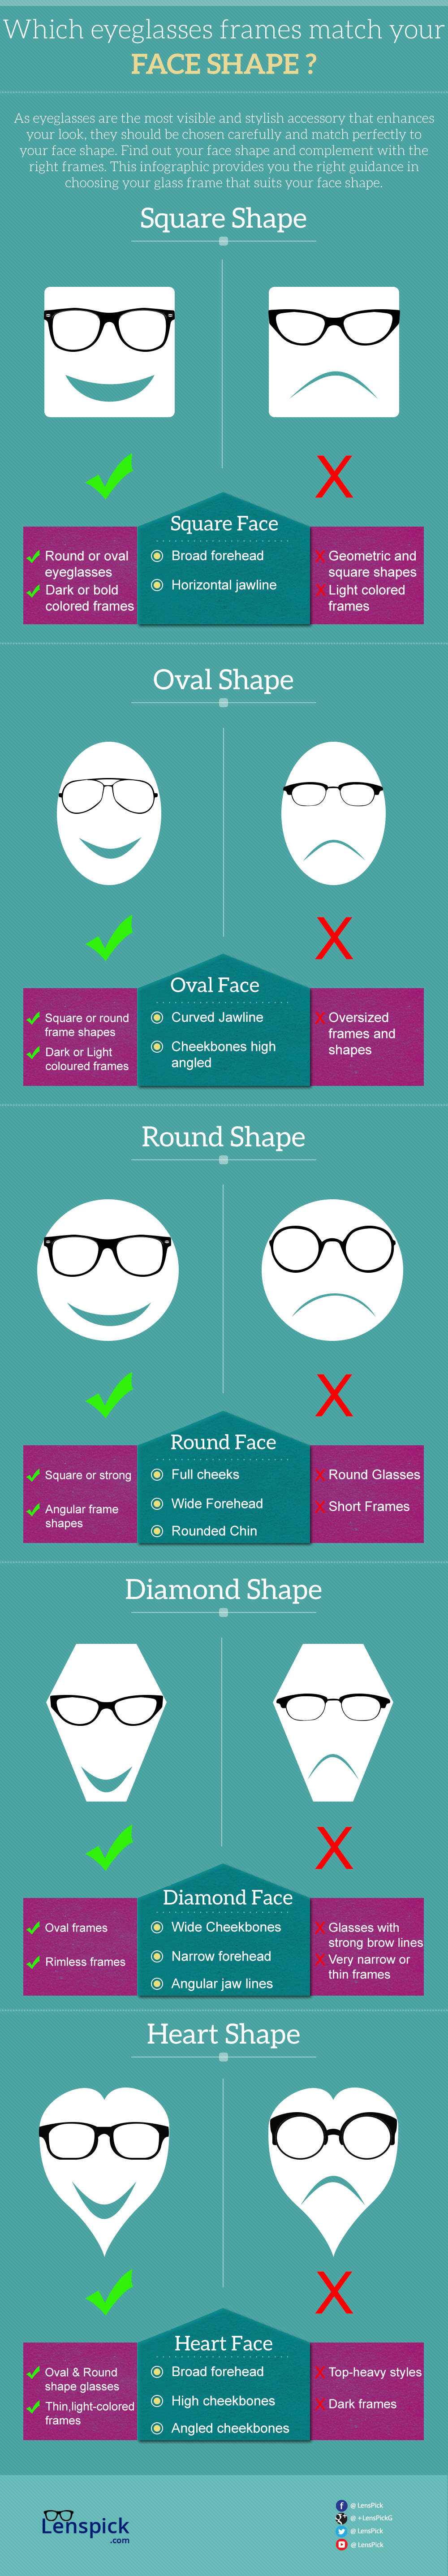 Eyewear for different face shapes